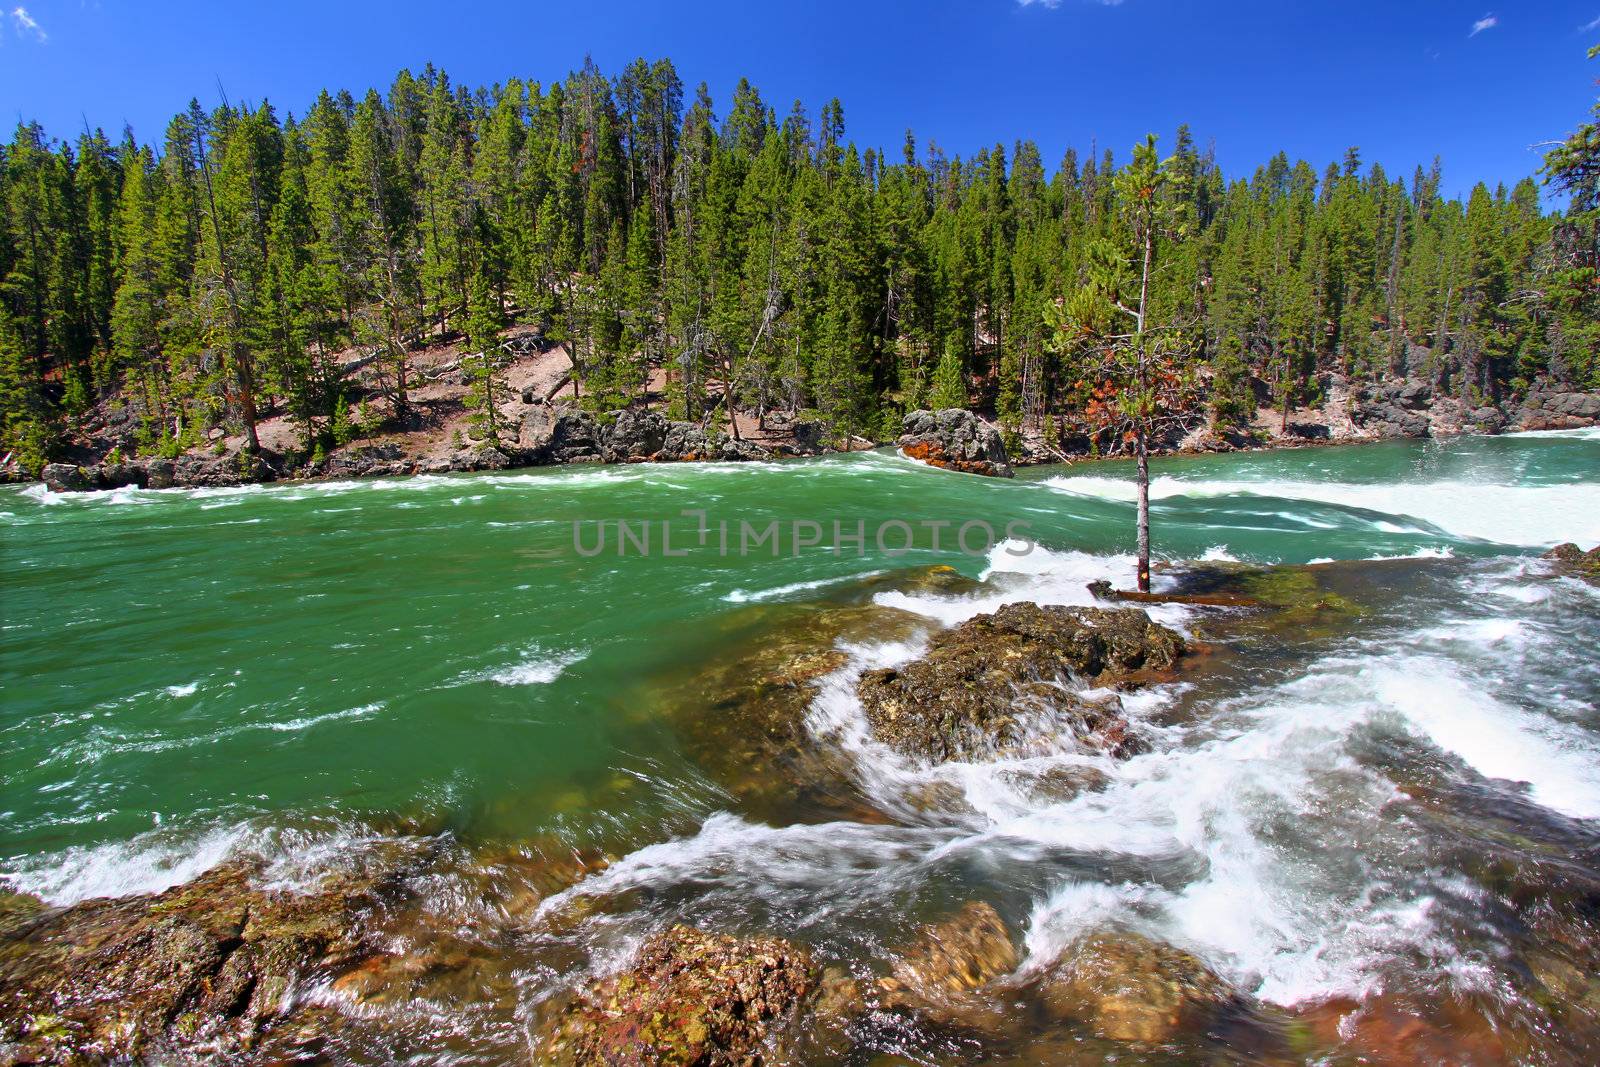 Swift current and rapids of the Yellowstone River fueled by snowmelt of the previous winter.